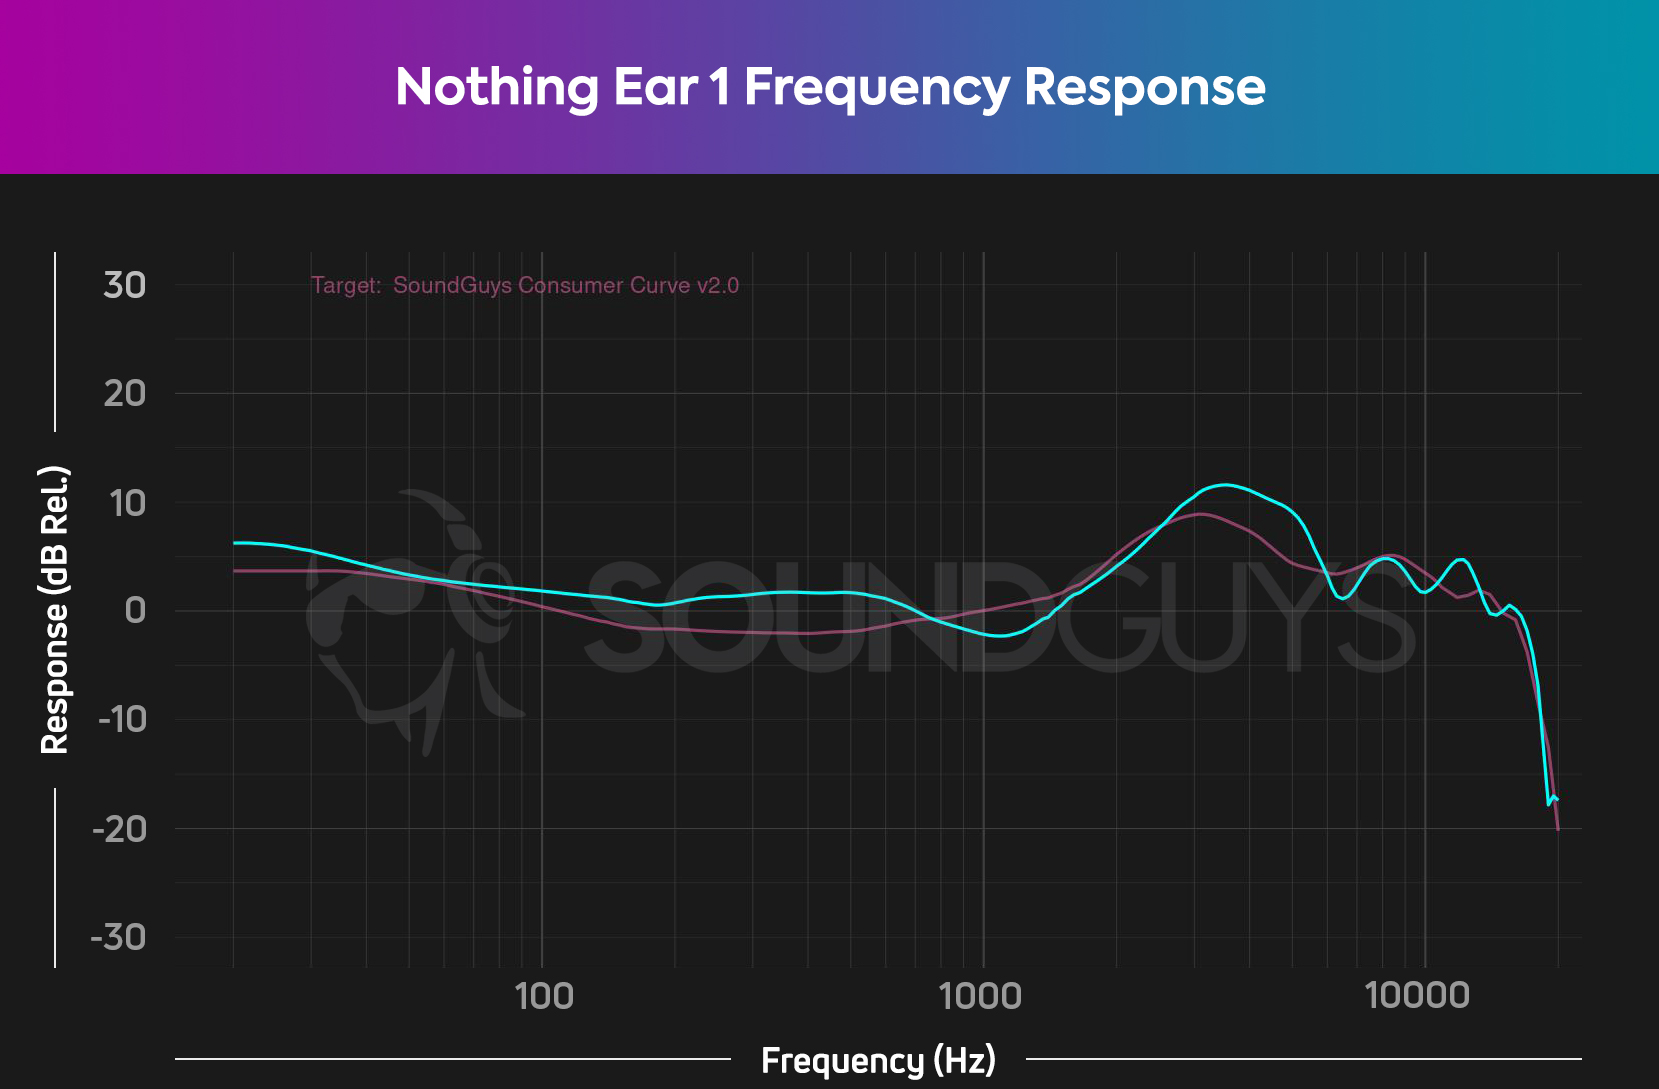 Nothing Ear 1 frequency response chart HATS SoundGuys consumer curve V2